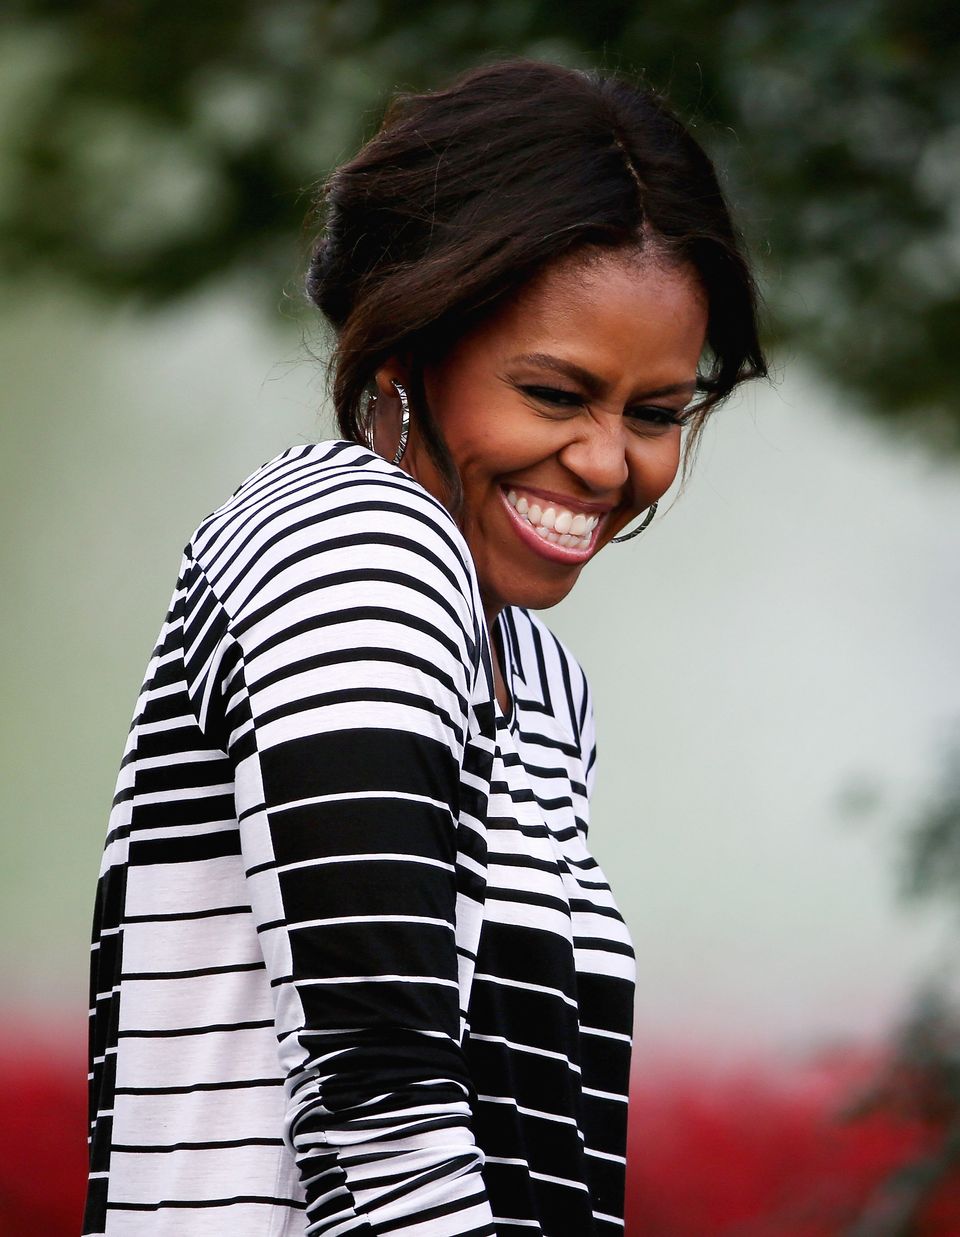 13 Trends To Steal From Michelle Obama's Style This Spring | HuffPost Life